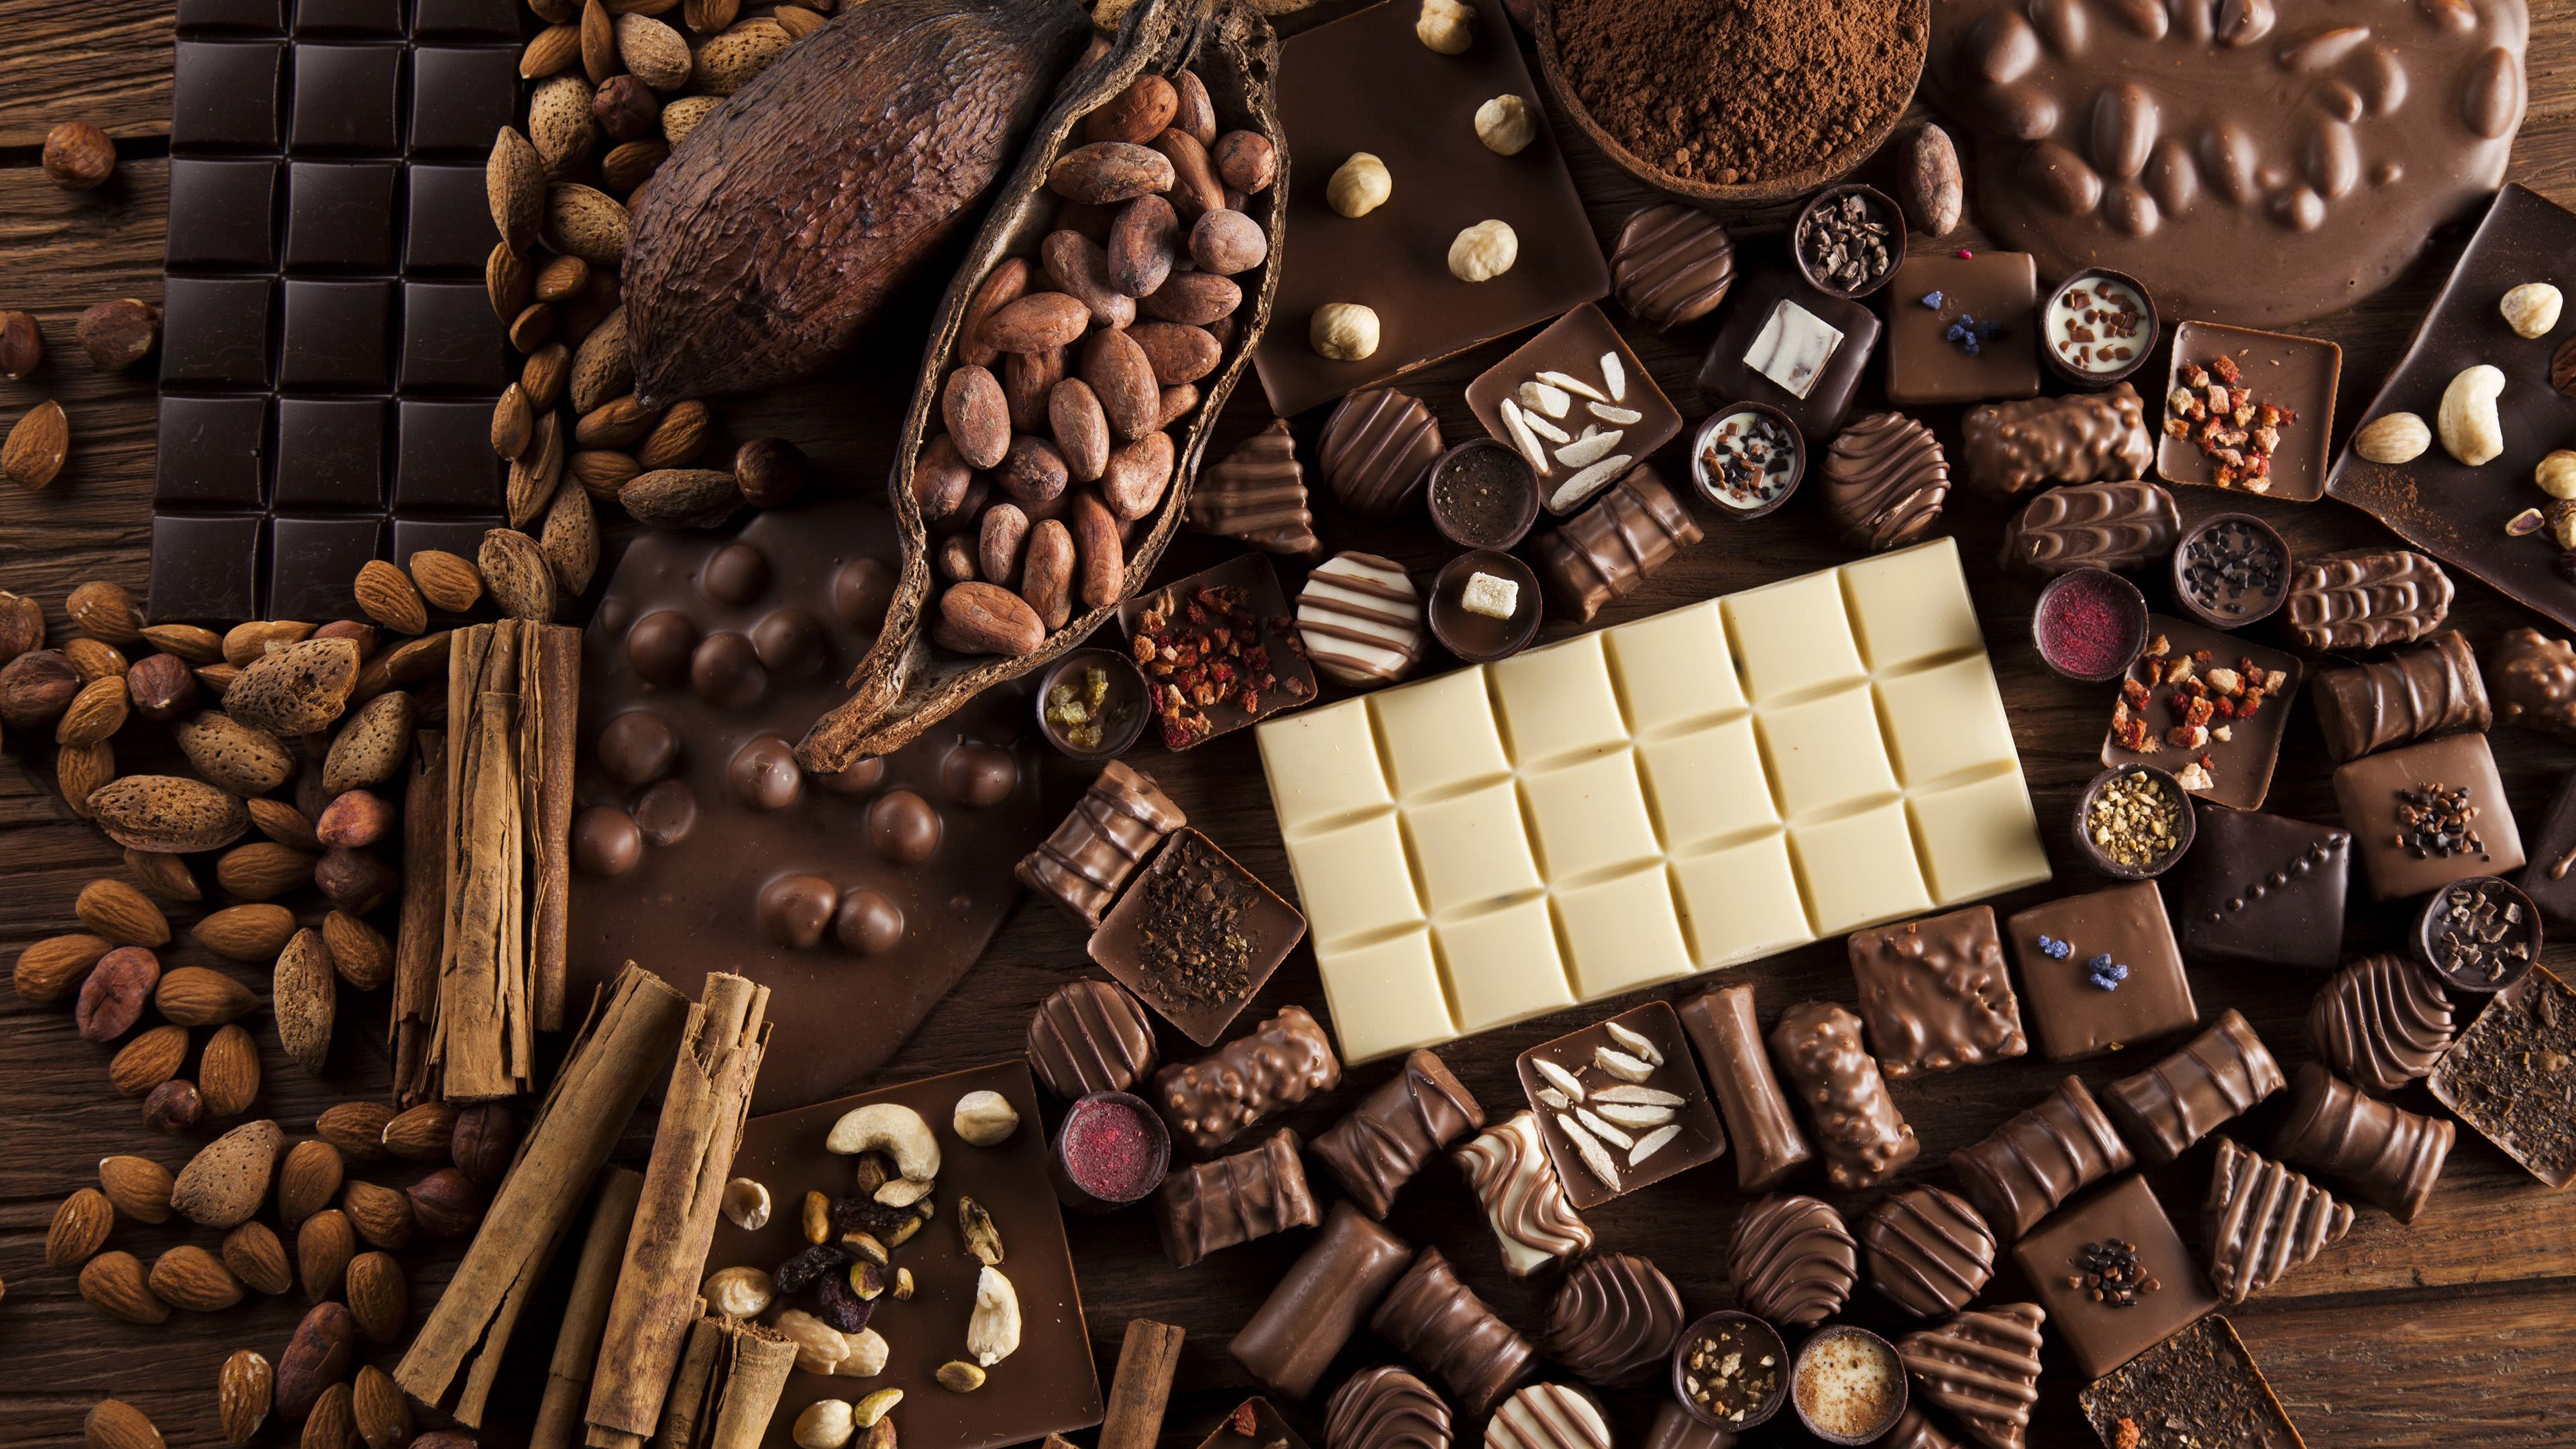 Chocolate And Cocoa Beans UHD 4K Wallpaper